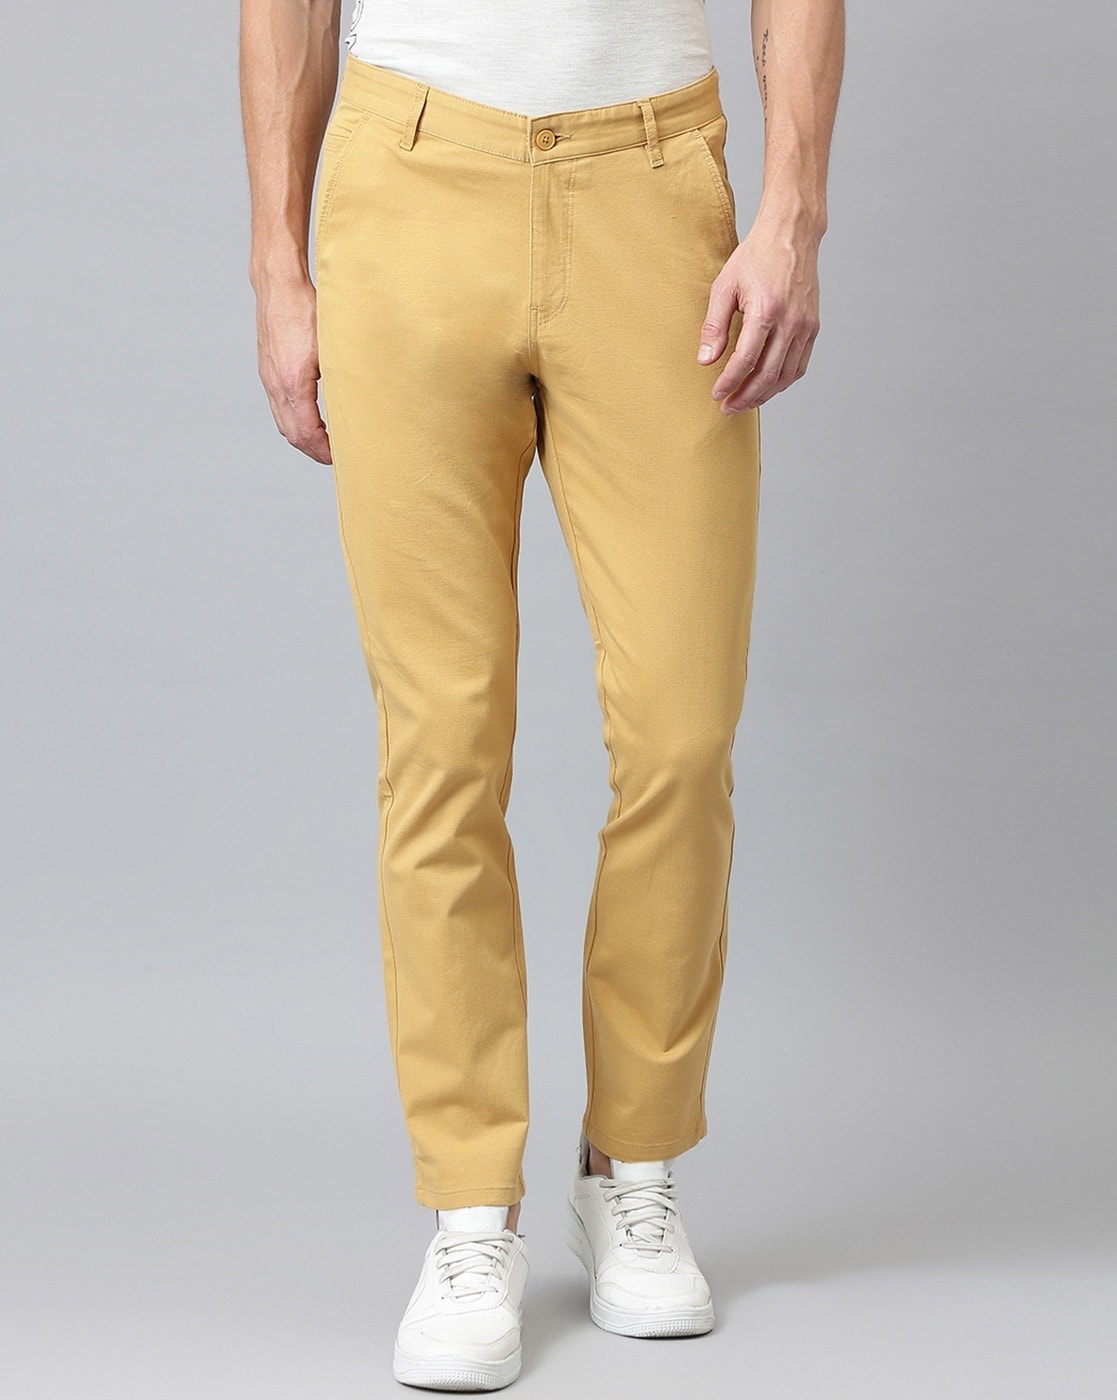 Buy Cool And Comfortable Black Chinos Mens Online in India